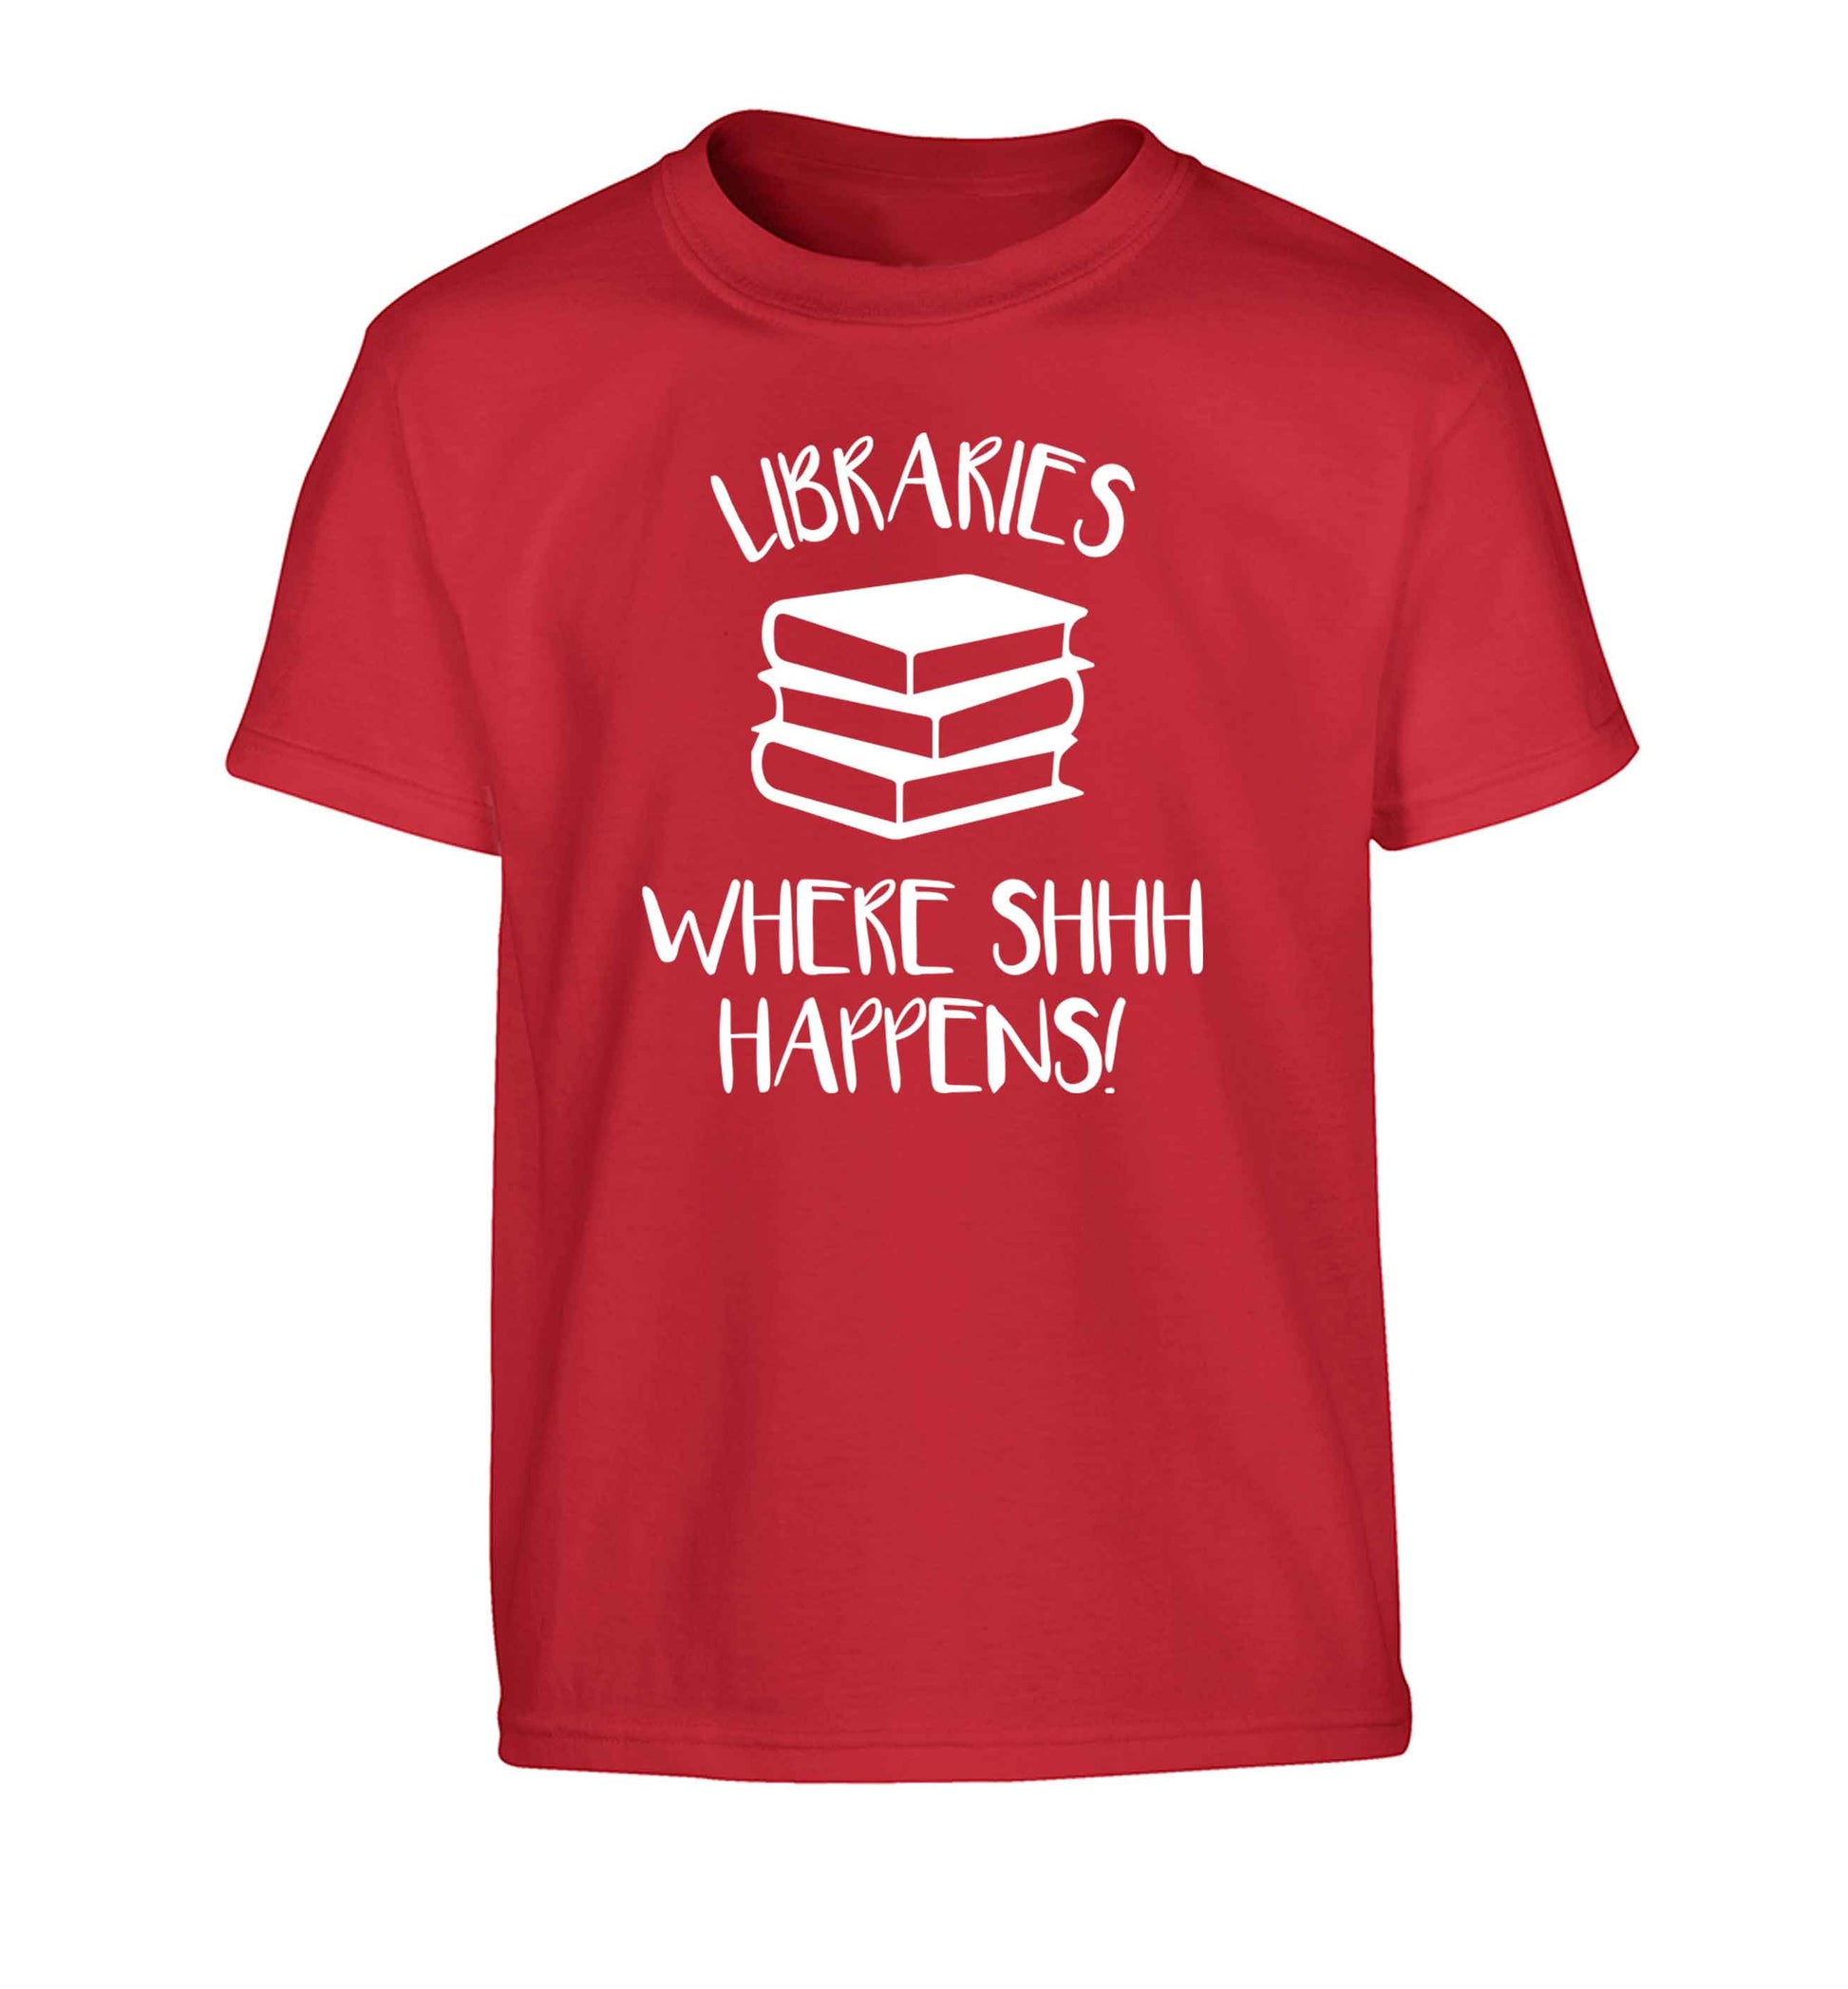 Libraries where shh happens! Children's red Tshirt 12-13 Years